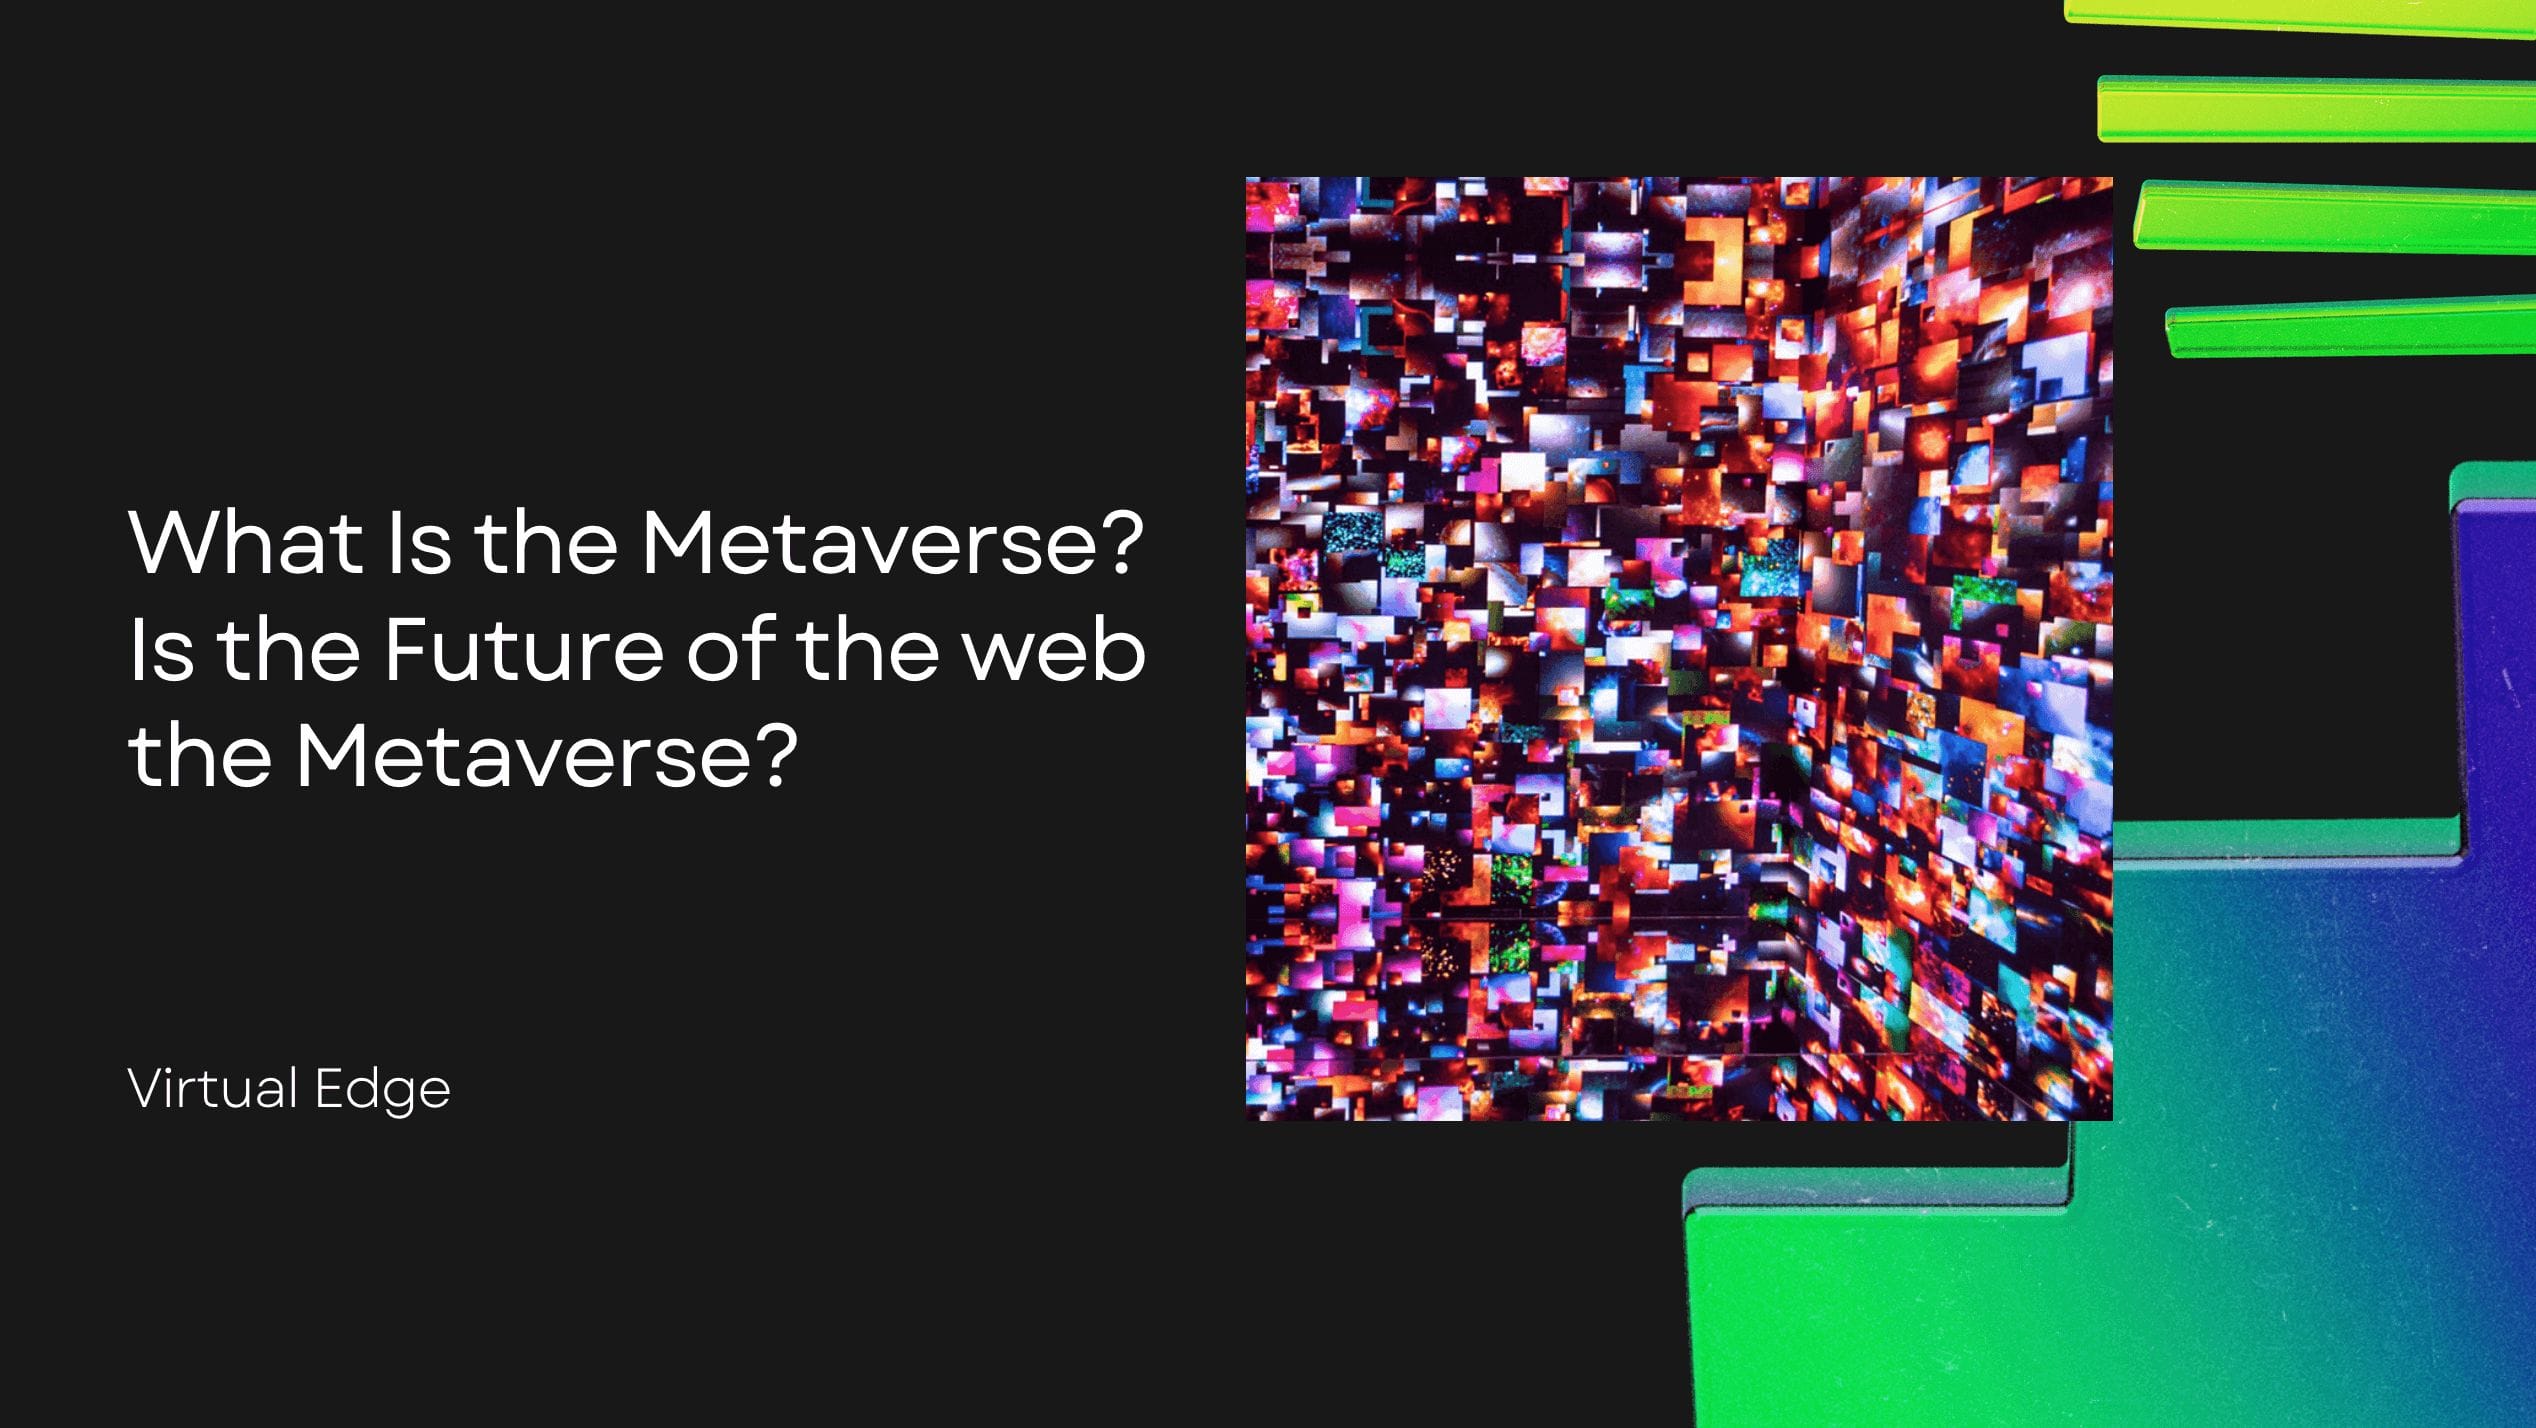 What Is the Metaverse? Is the Future of the web the Metaverse?